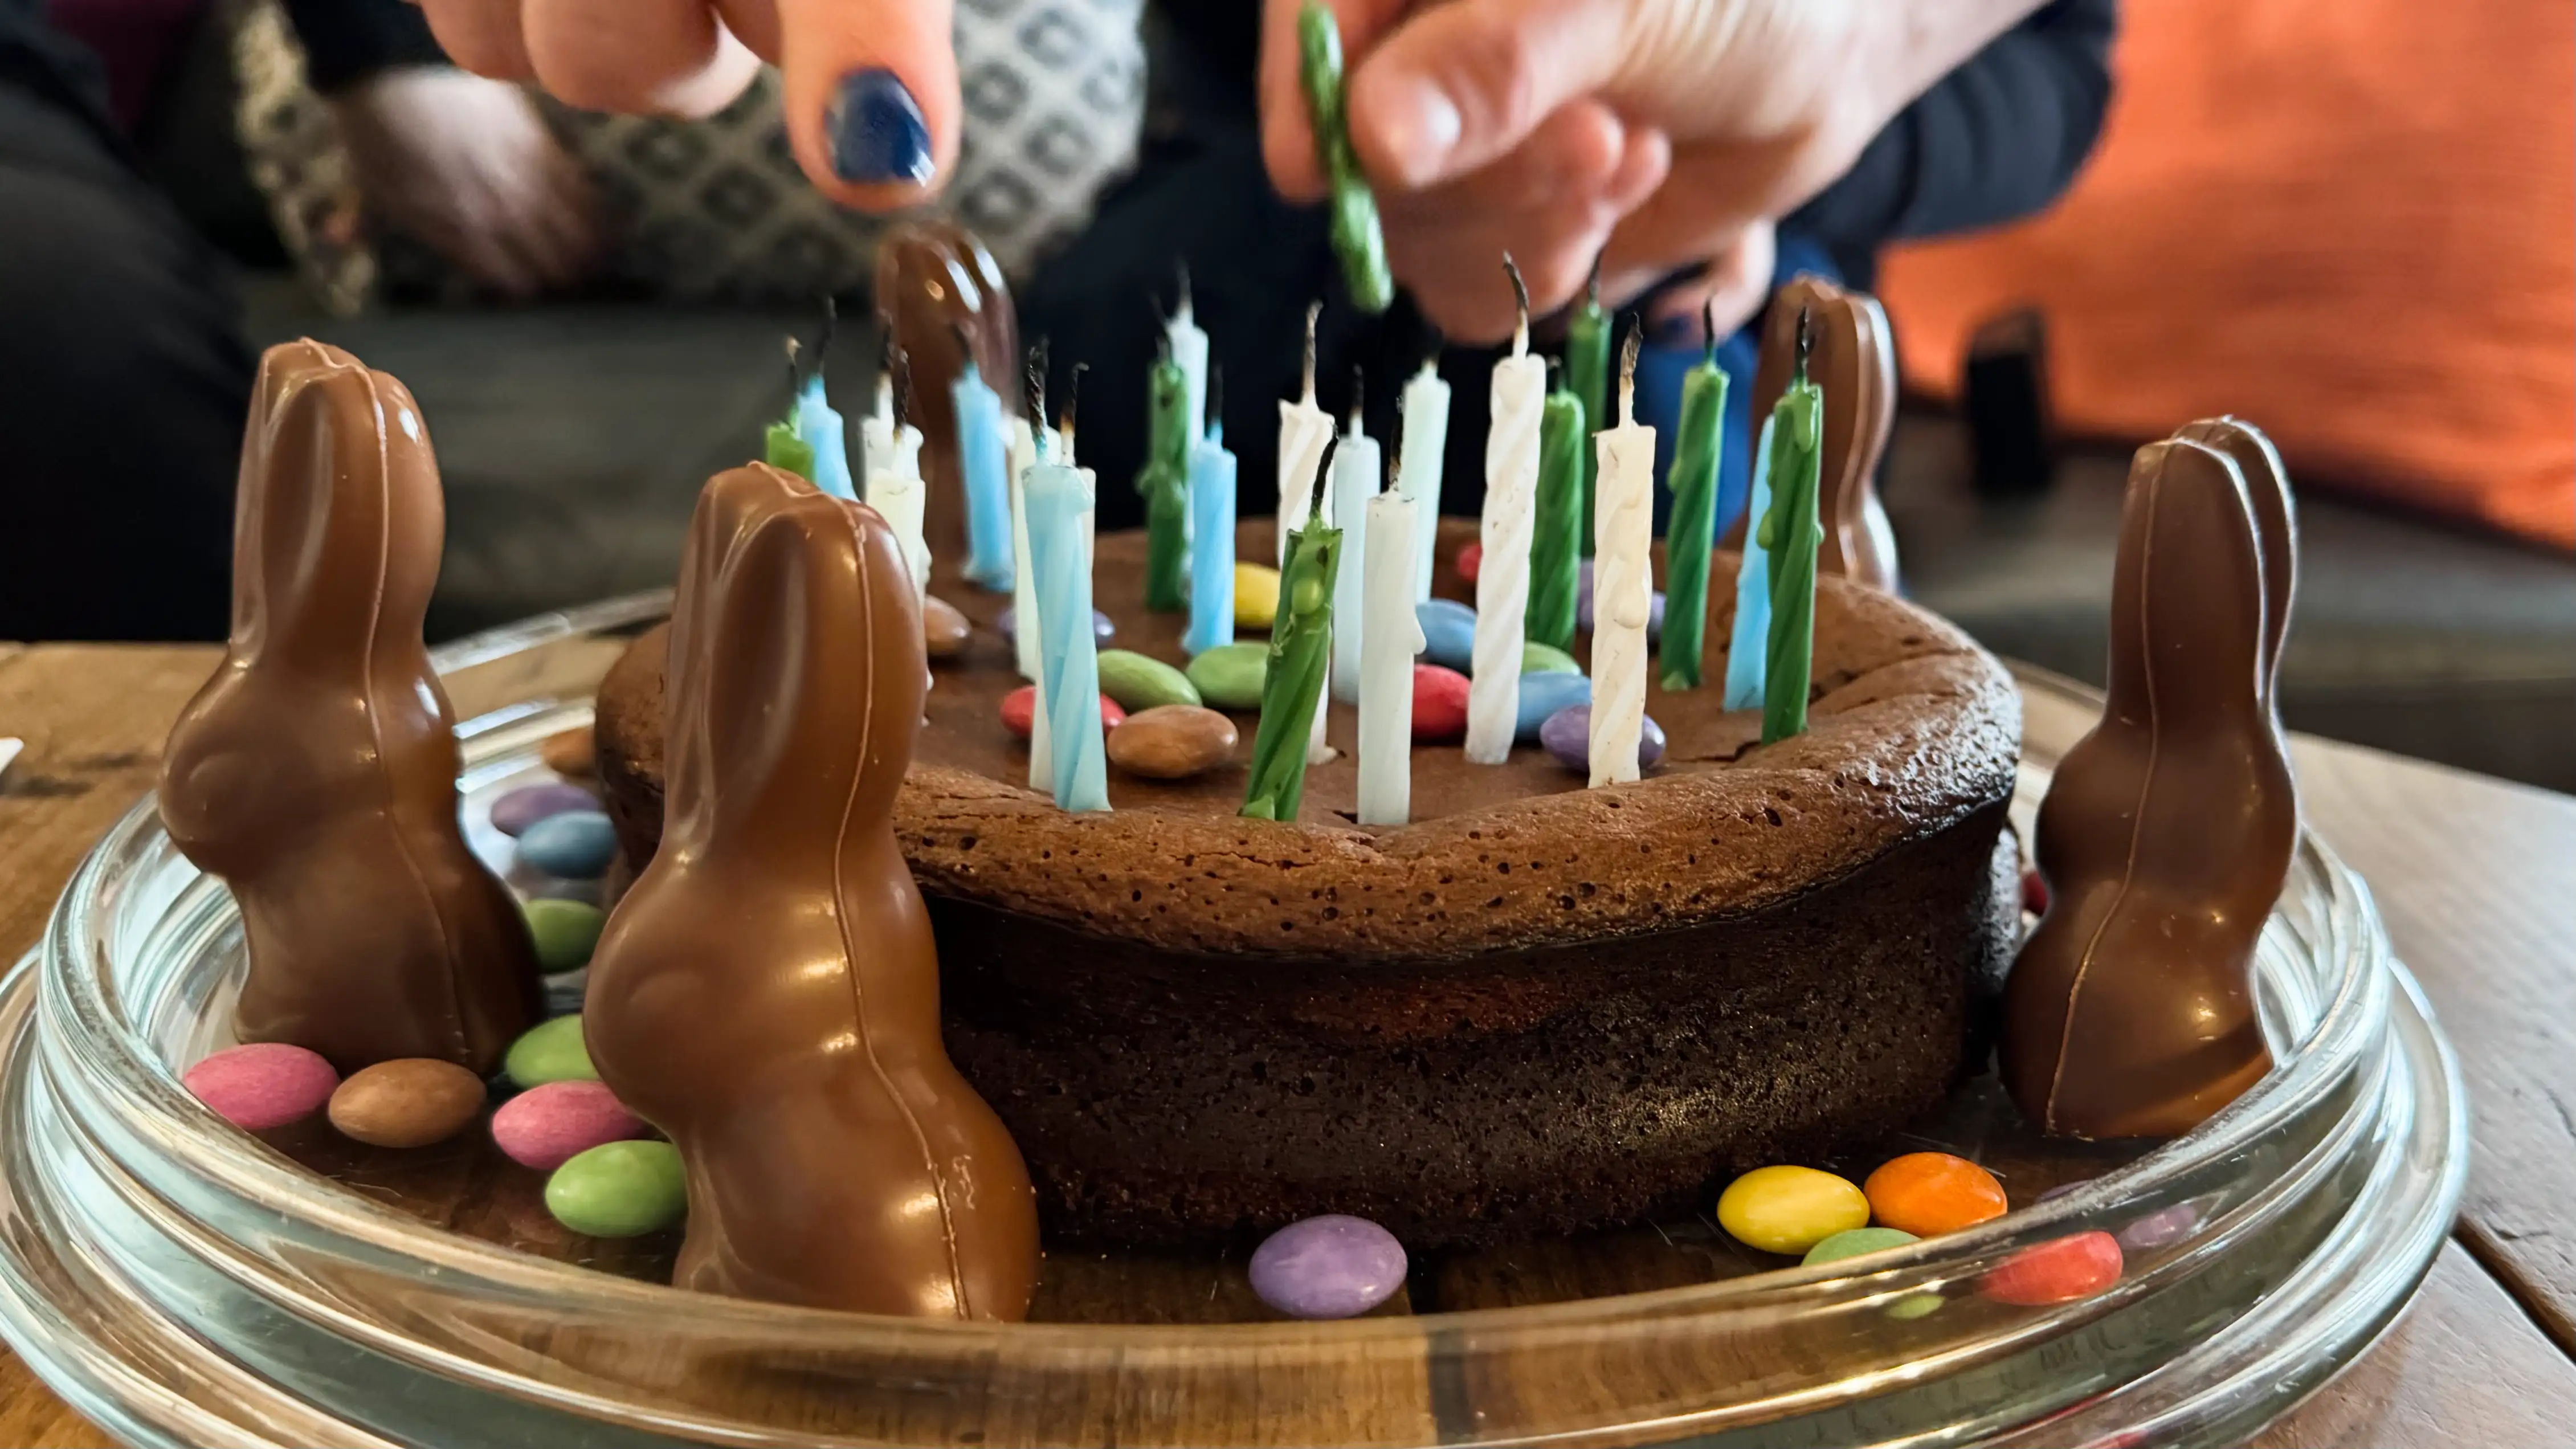 Chocolate cake with candles surrounded by chocolate Easter bunny rabbits